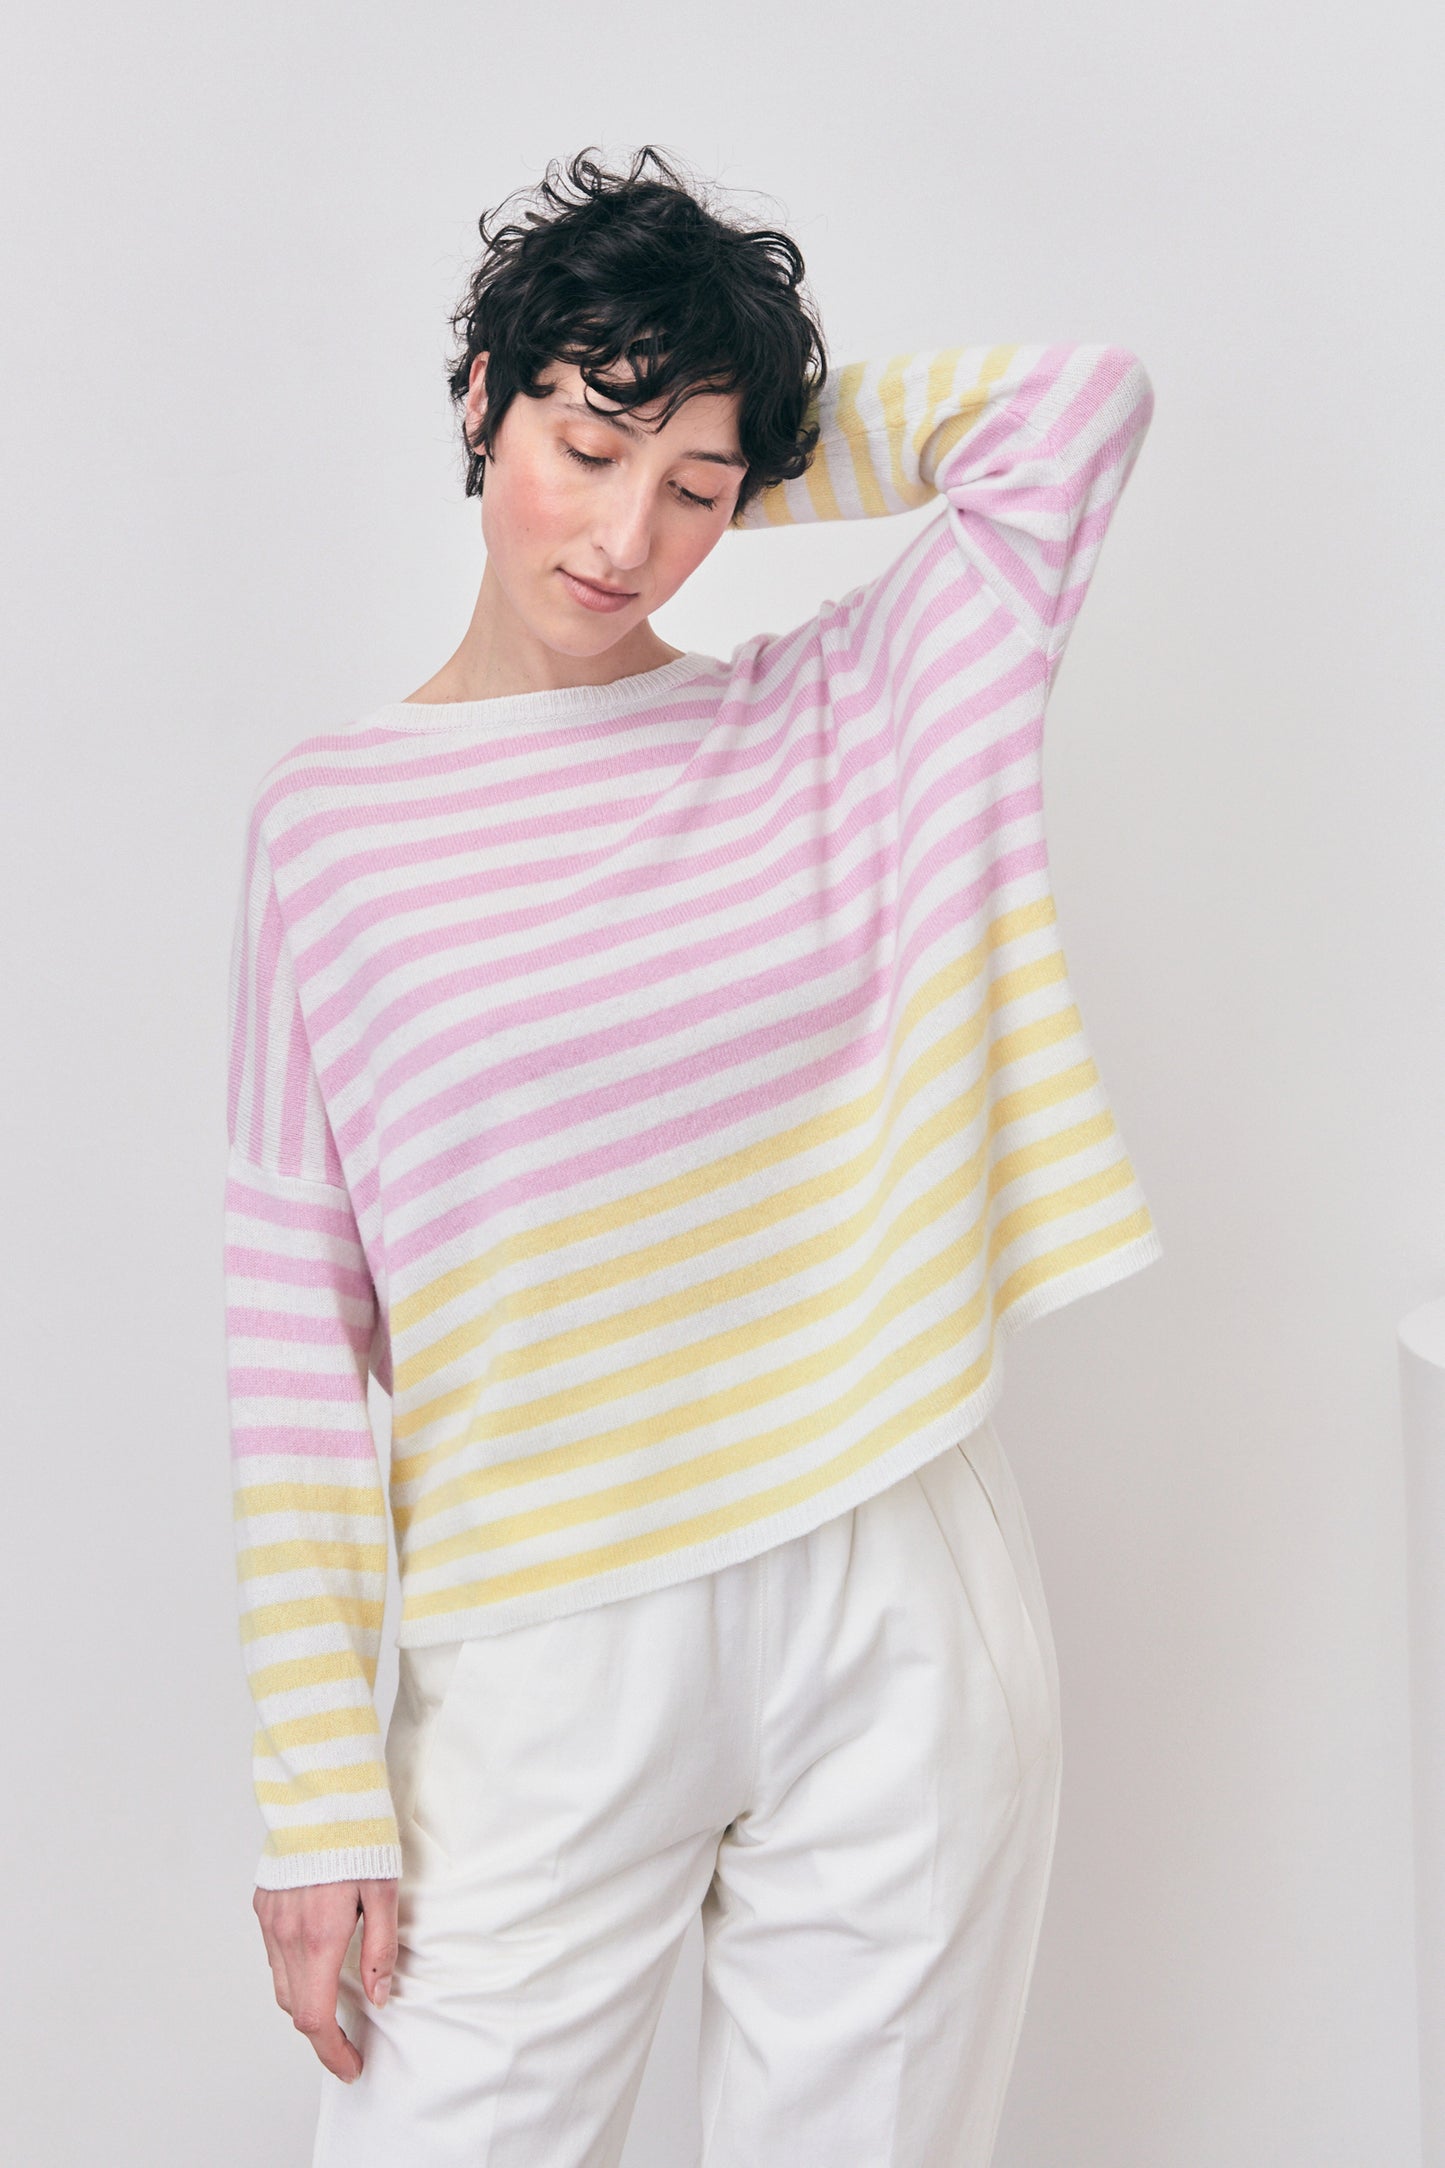 STRIPED CASHMERE PINK